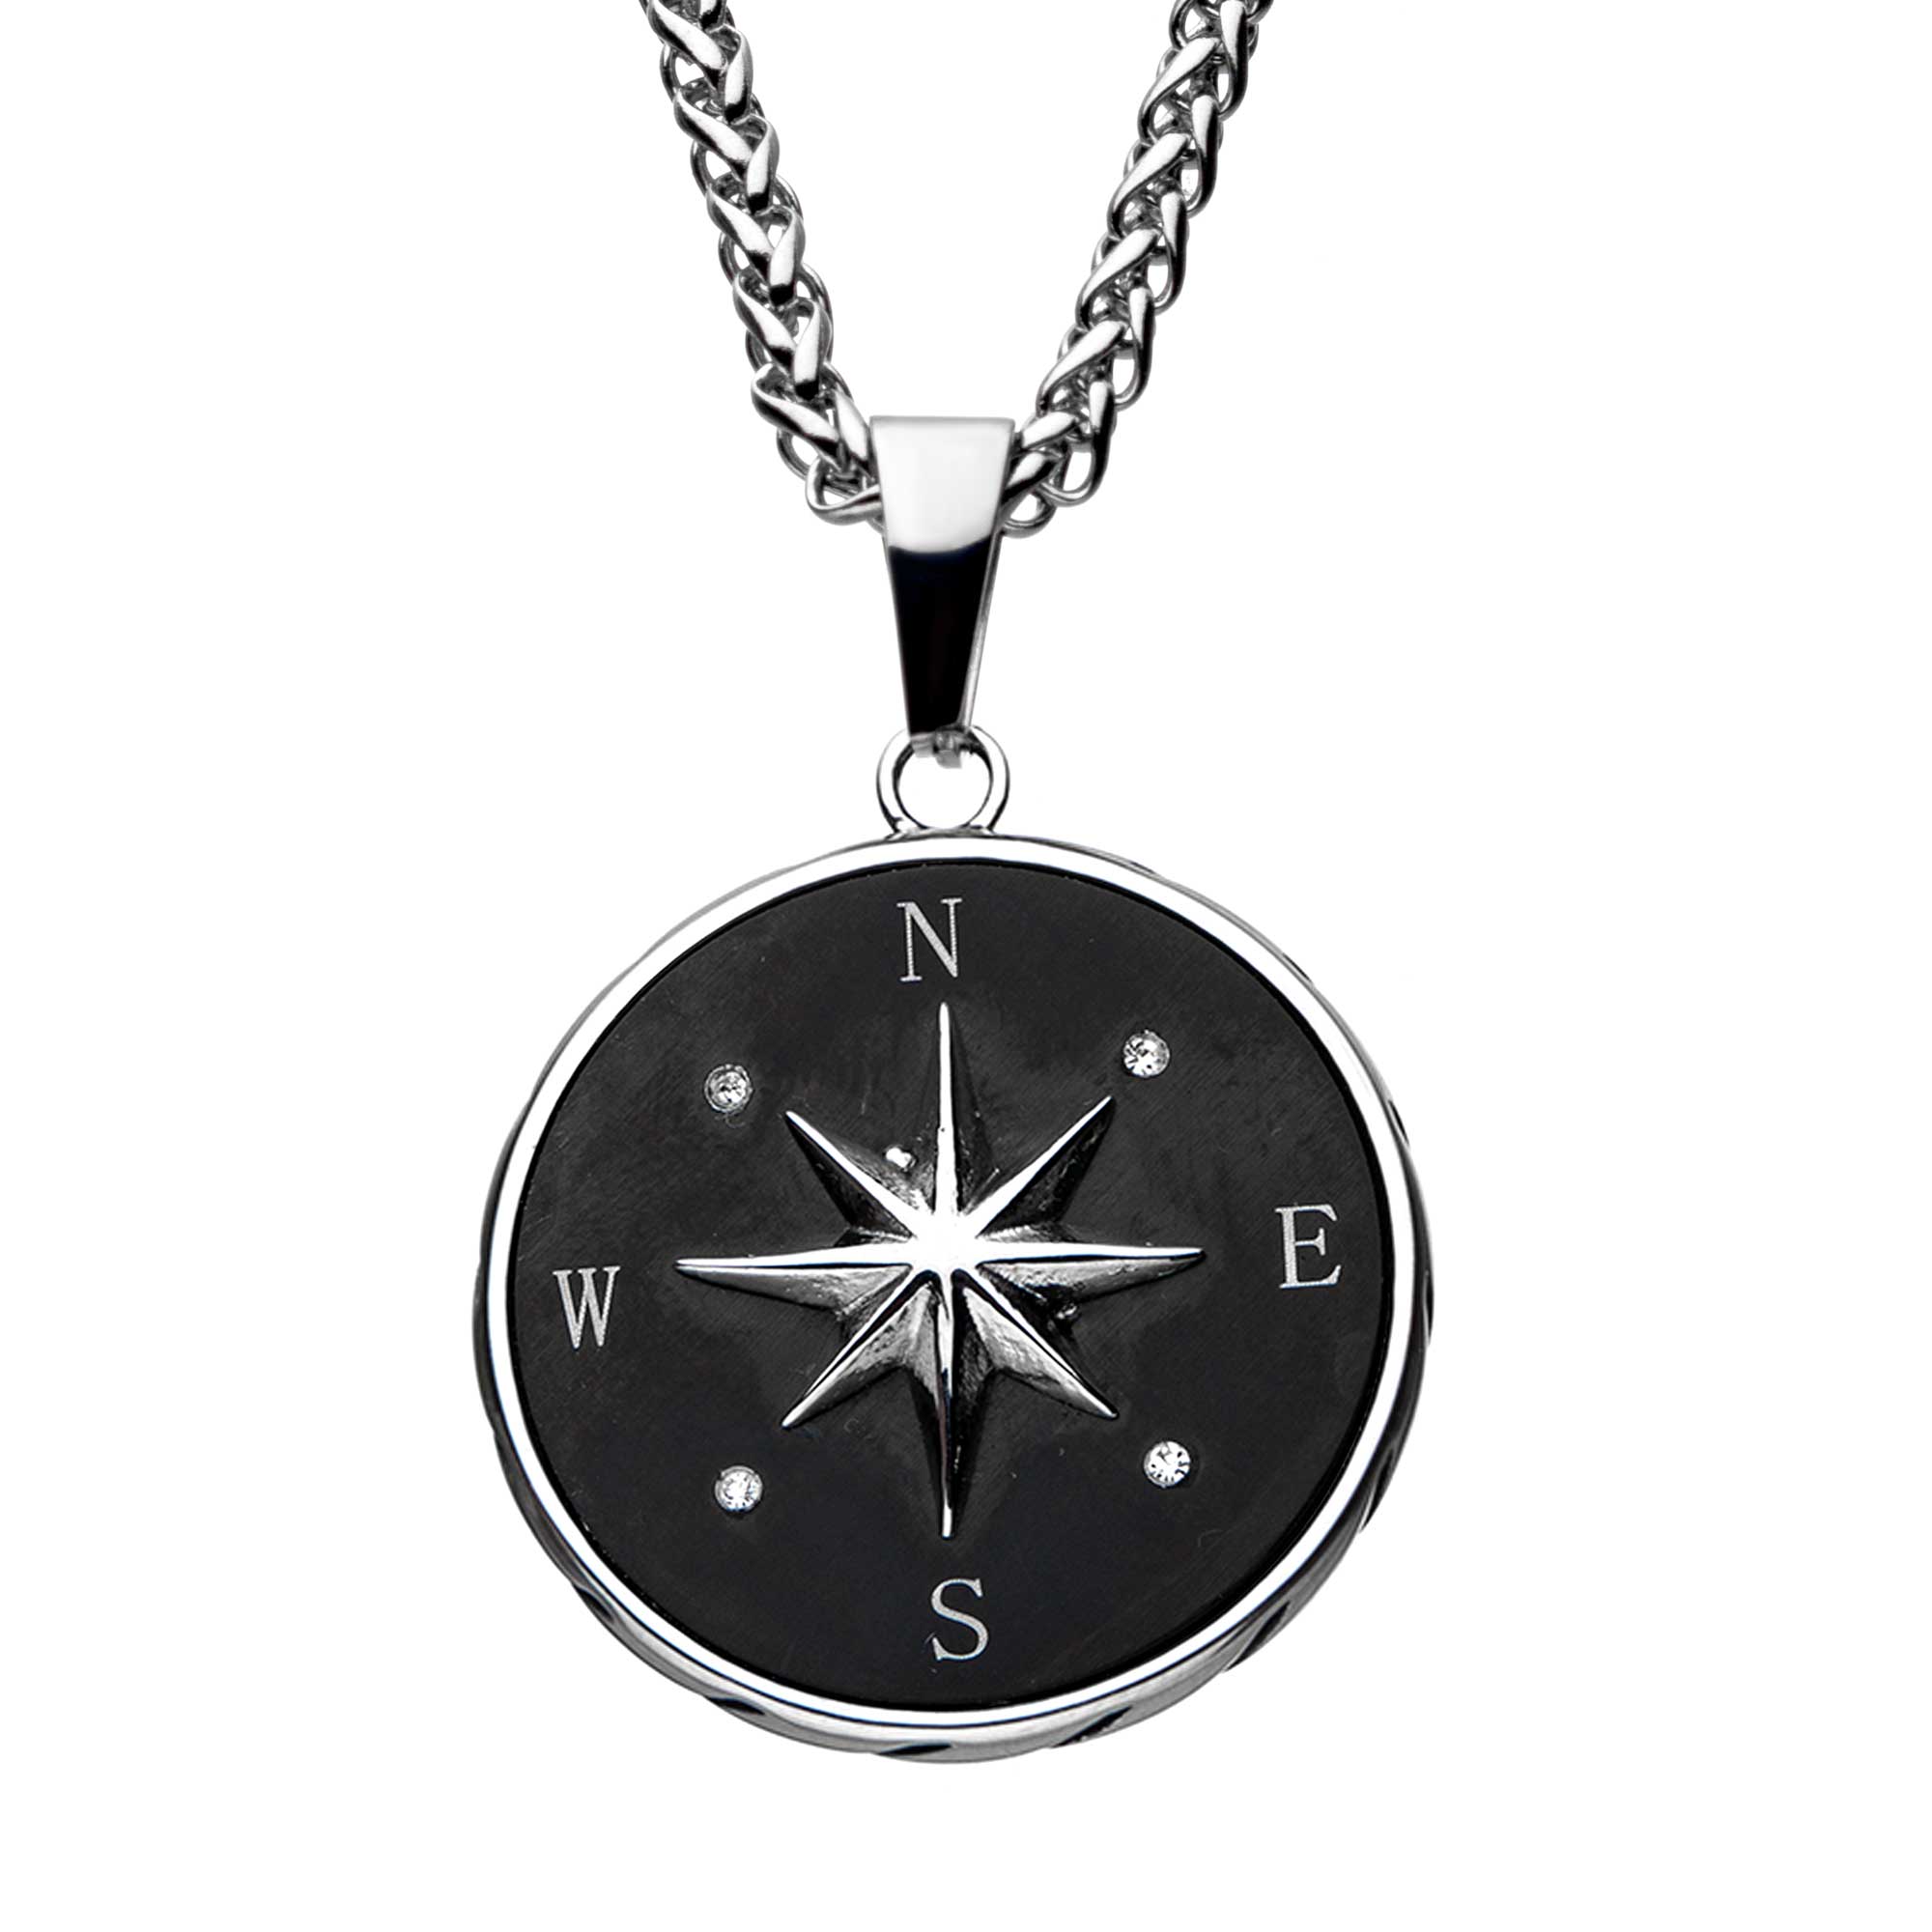 Stainless Steel and Black Plated Compass Pendant with Chain K. Martin Jeweler Dodge City, KS